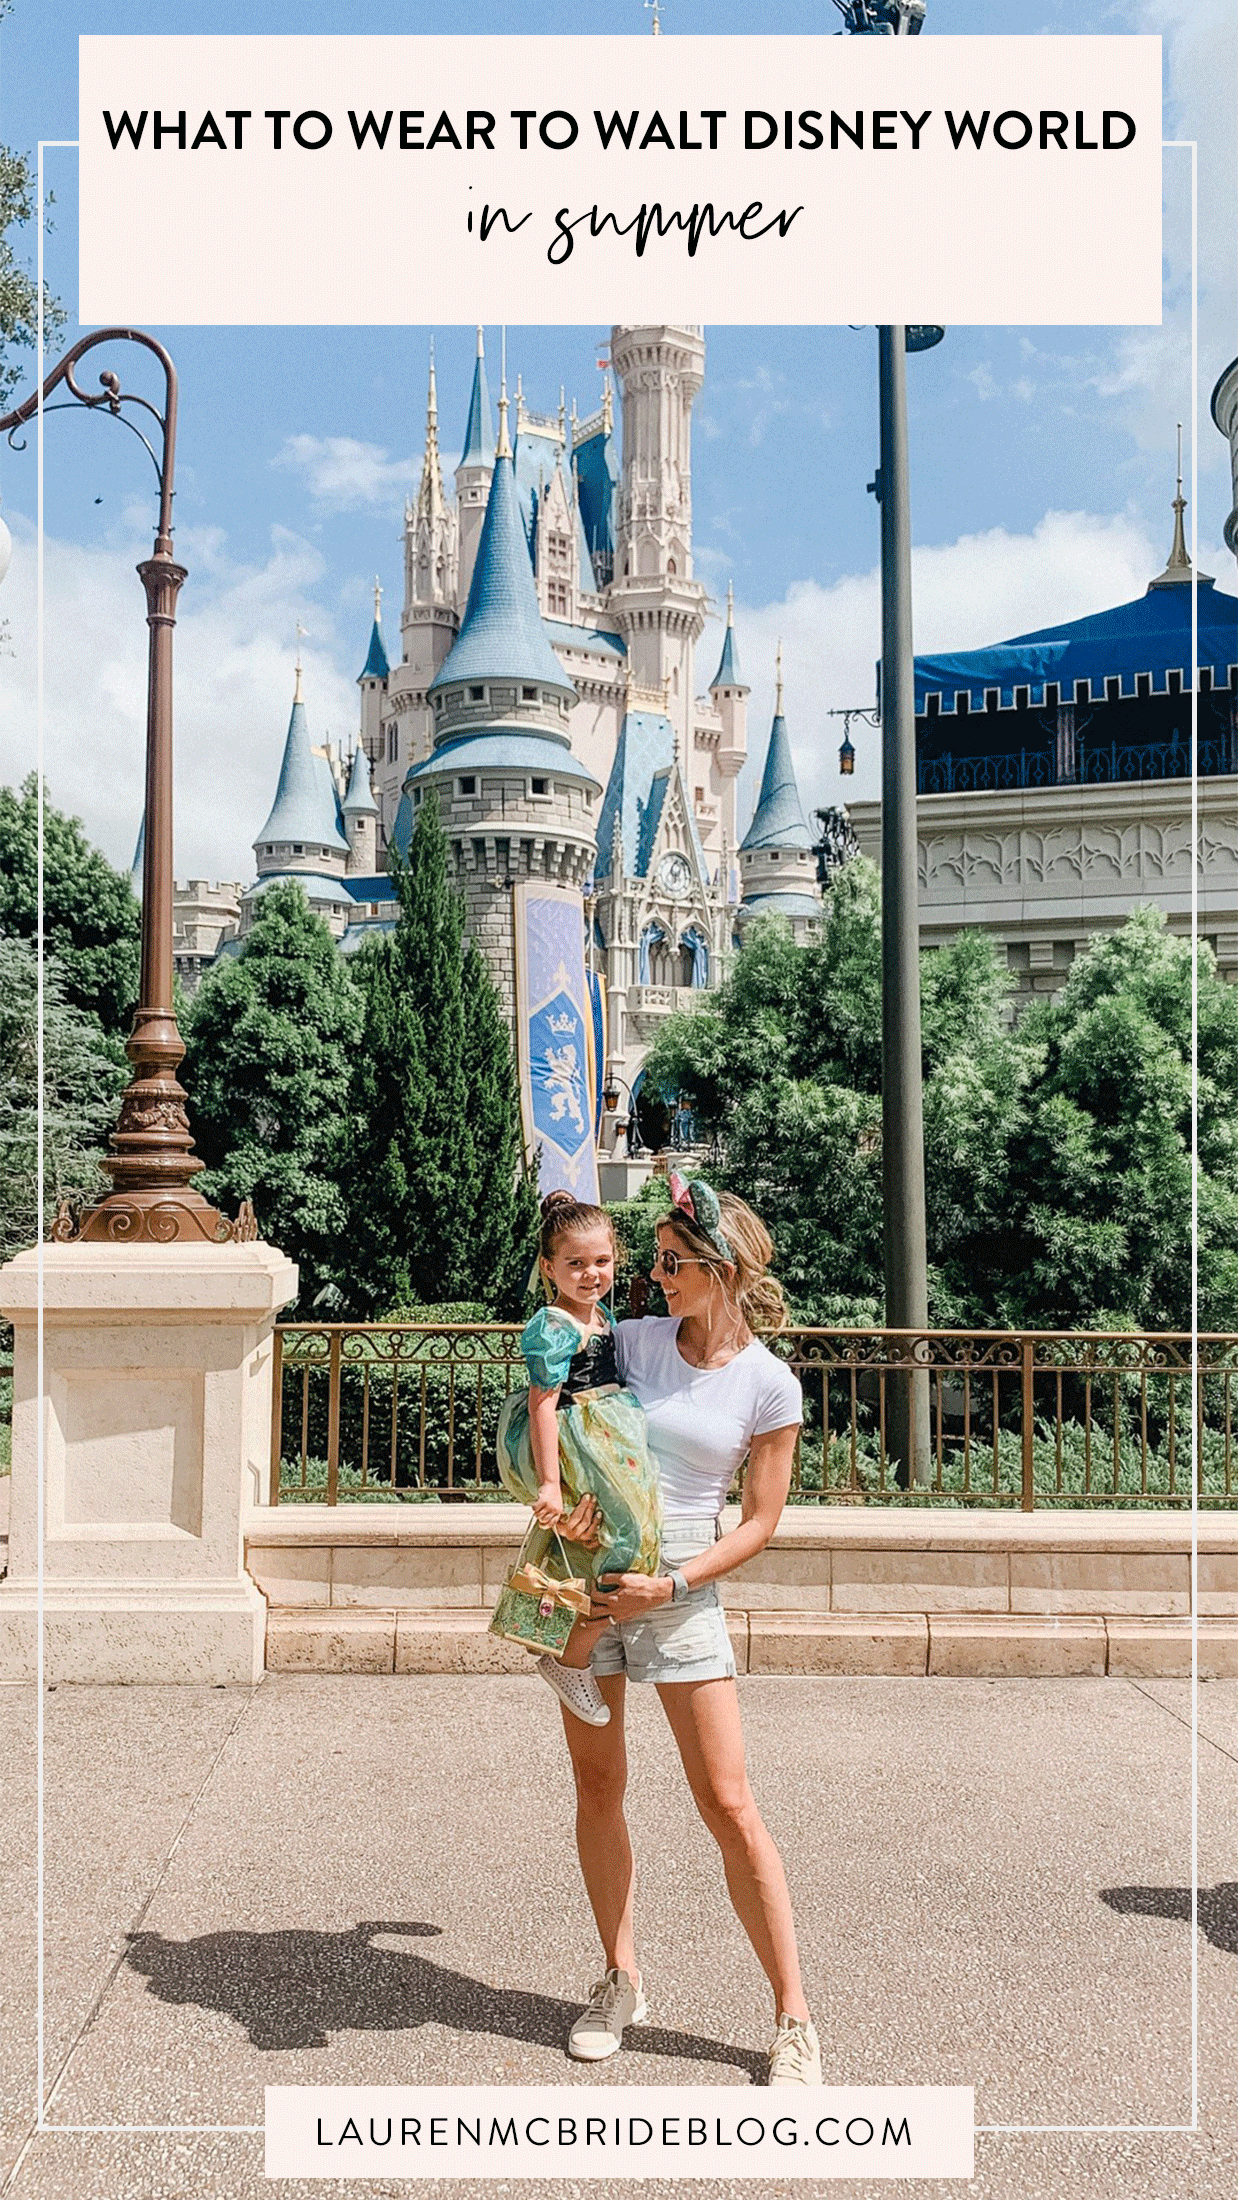 Connecticut life and style blogger Lauren McBride shares What to Wear to Walt Disney World in the Summer, including functional outfits for walking the parks.